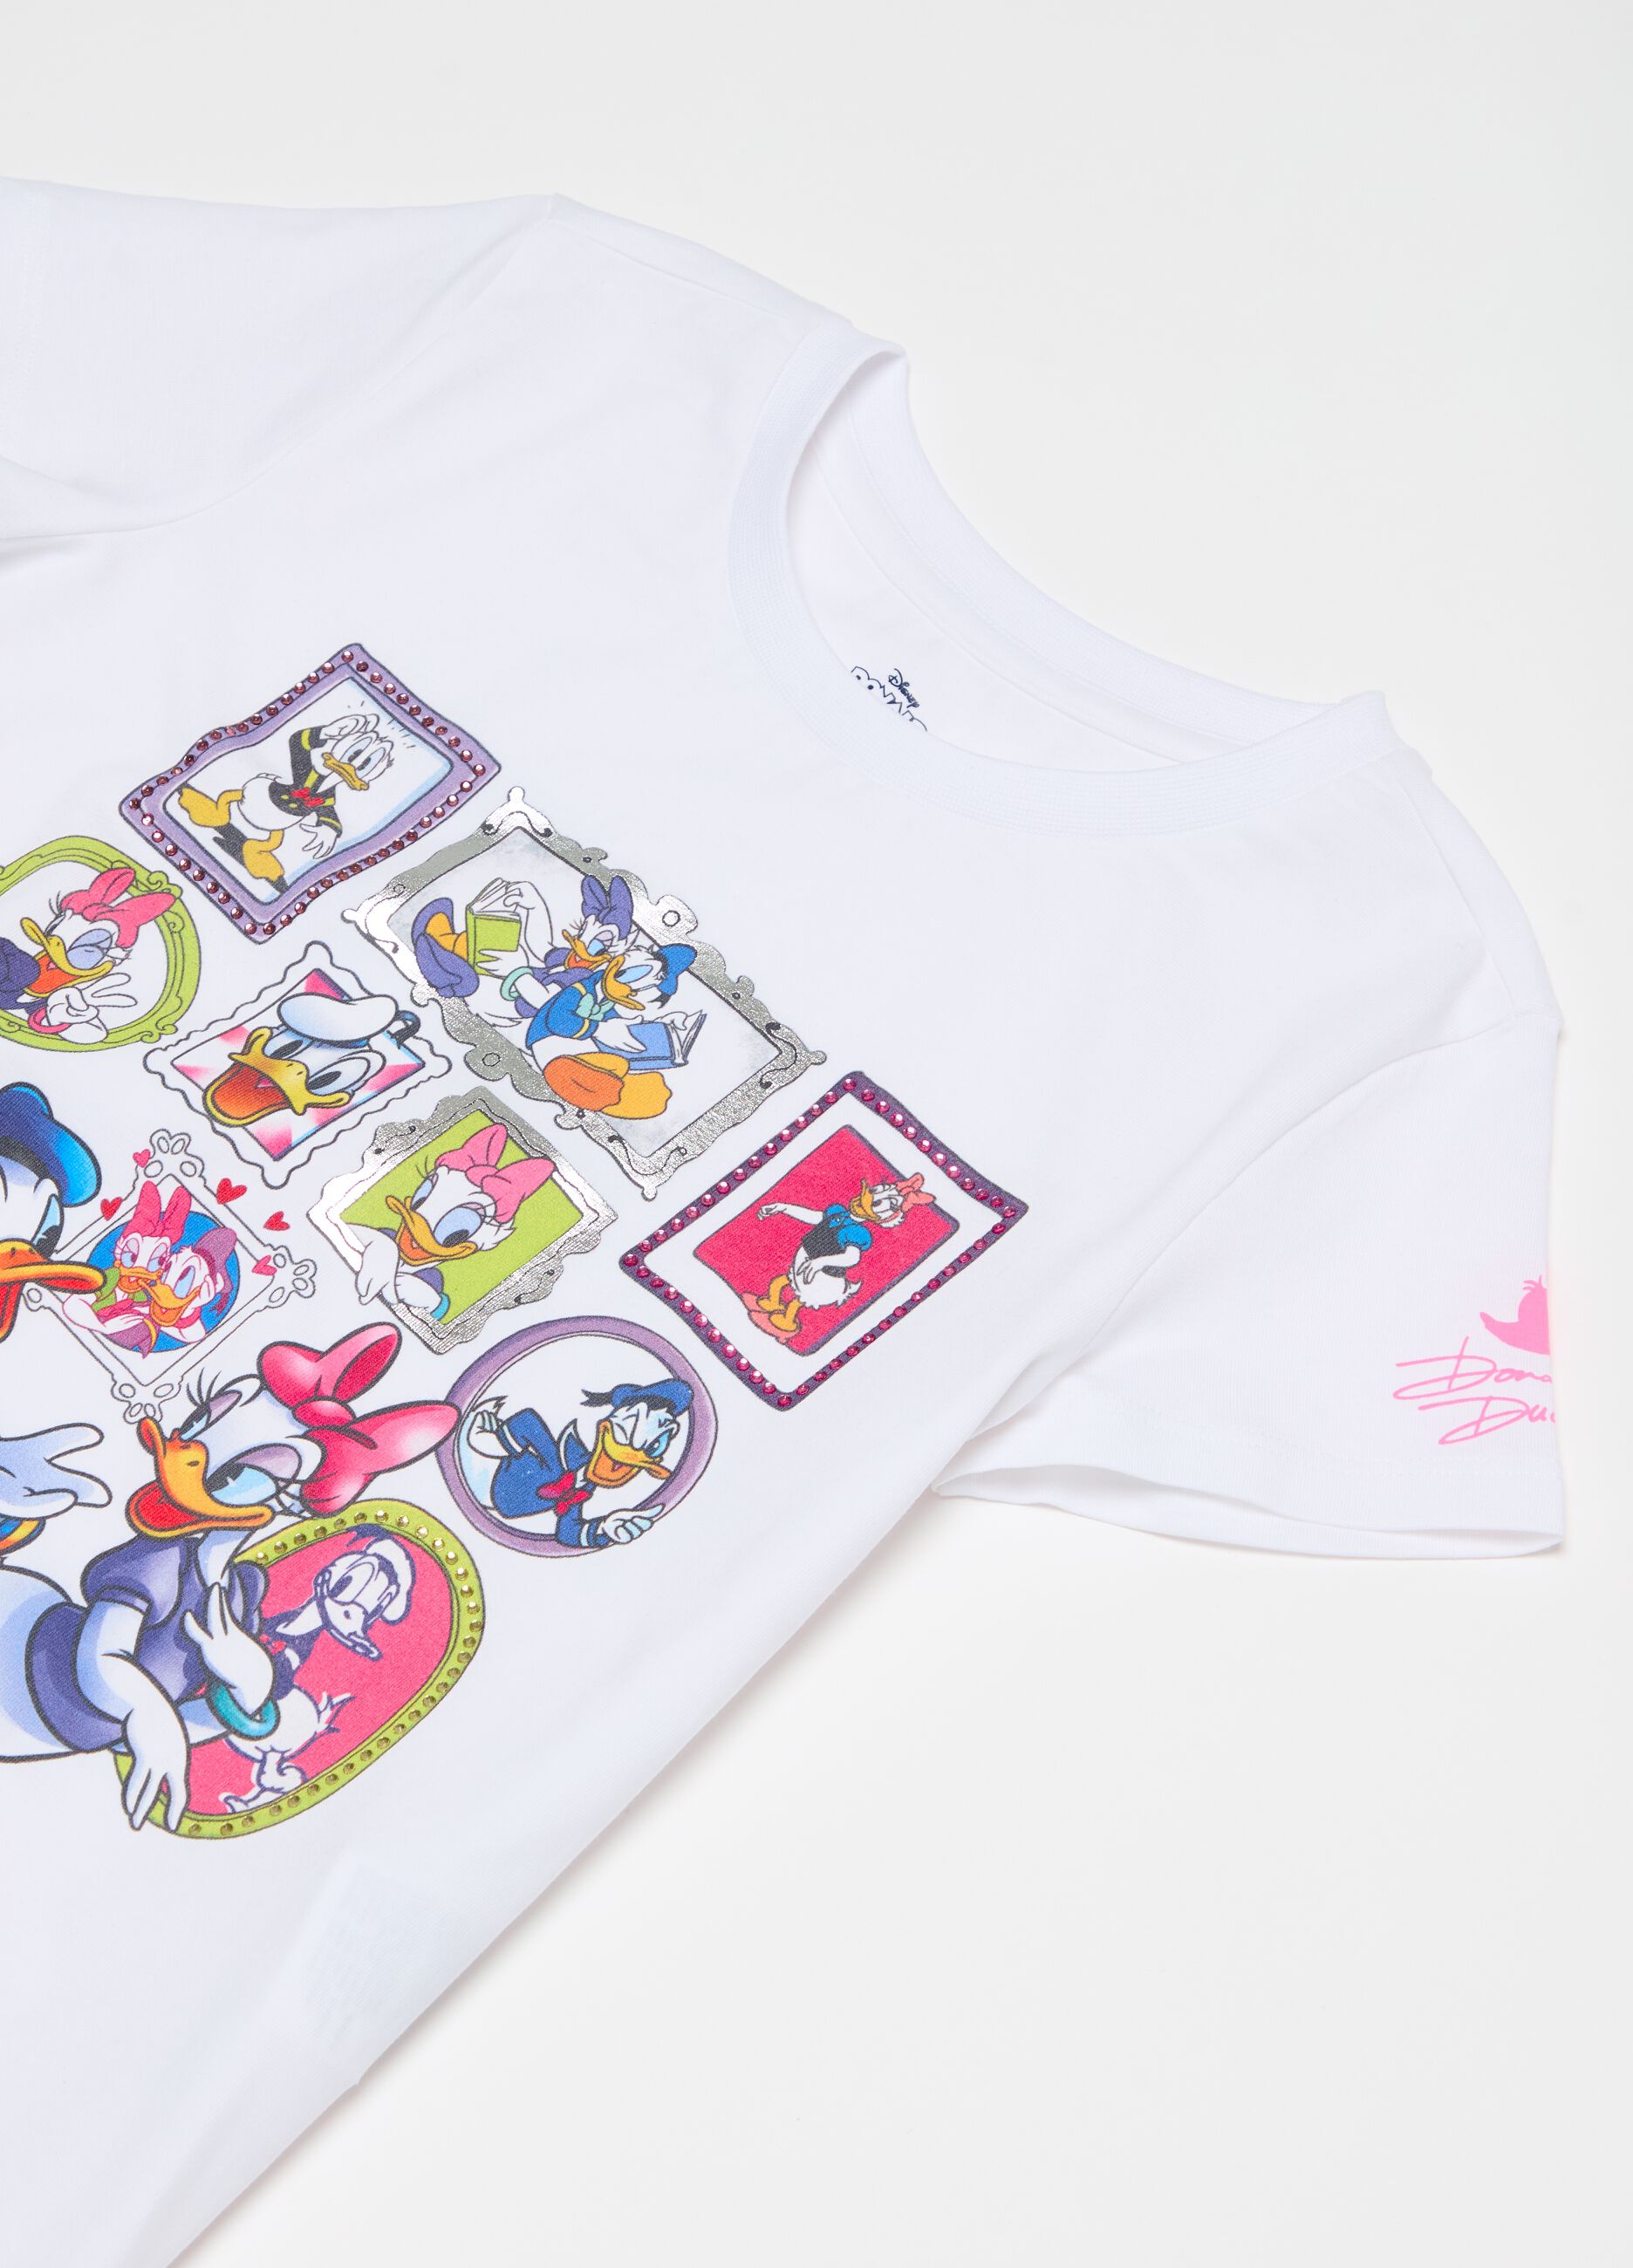 Stretch cotton T-shirt with Donald Duck 90 print